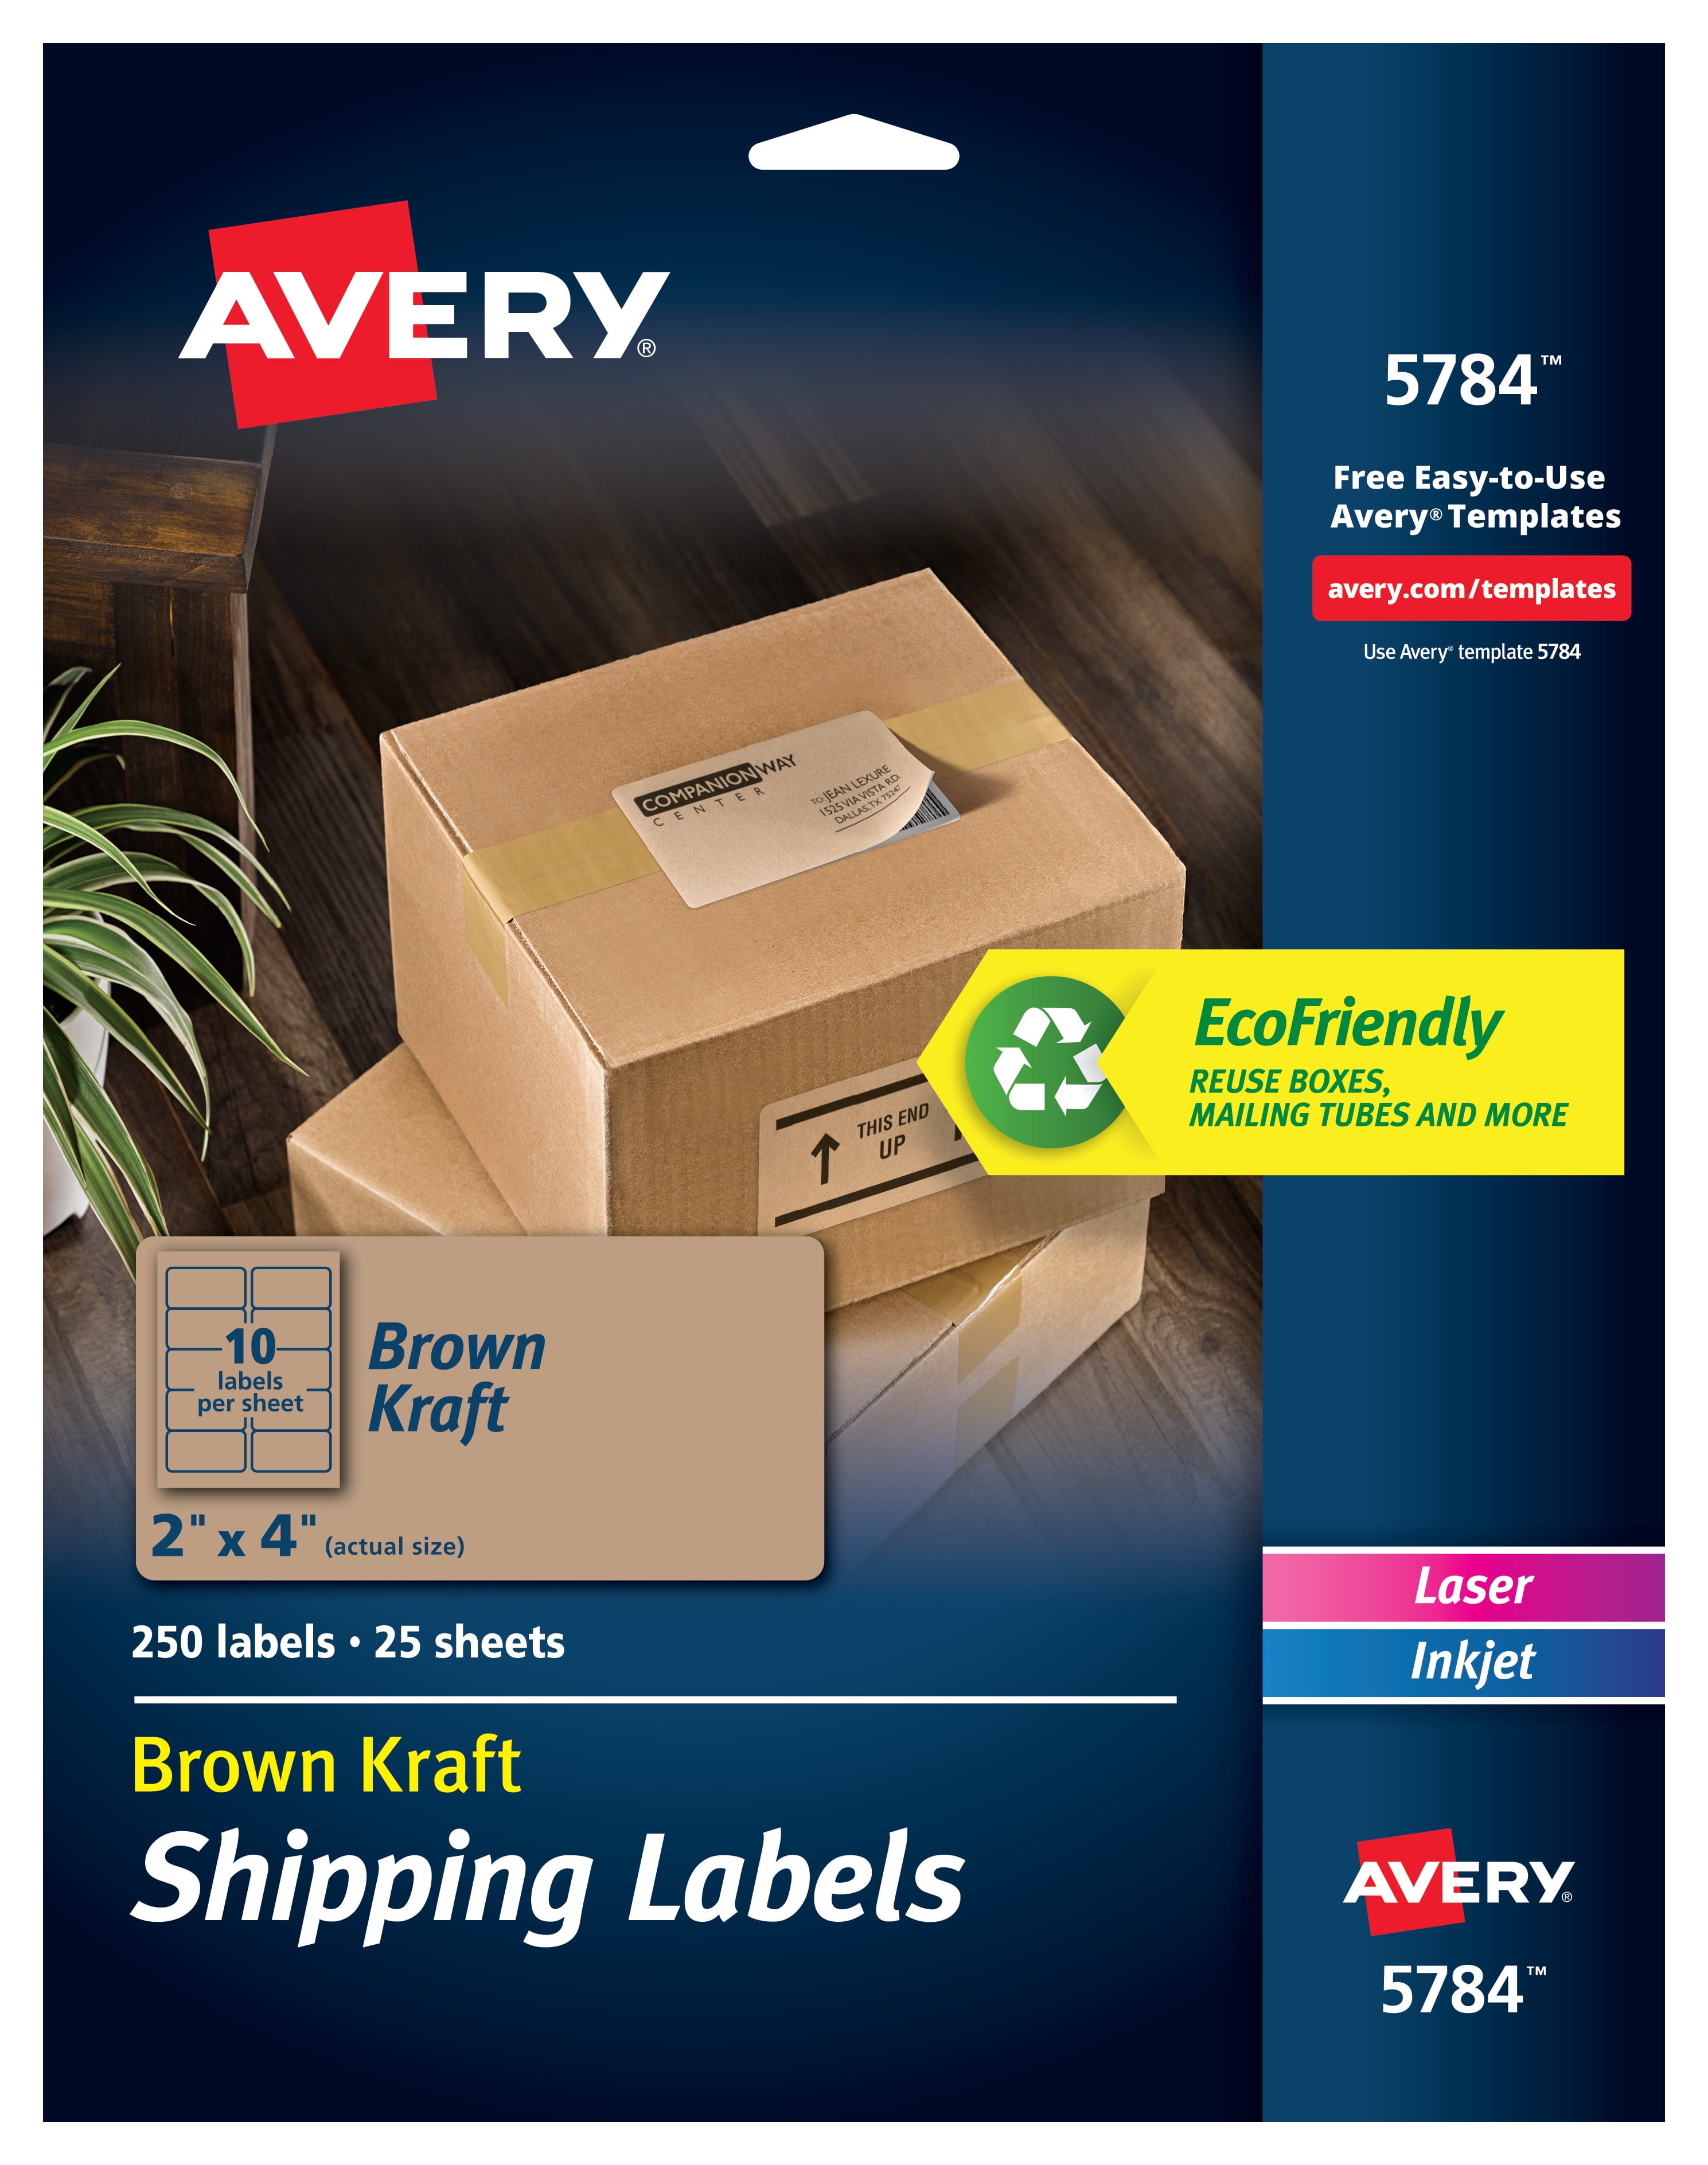 60 Labels 4 Sheets Avery 22846 Square Labels Inkjet 2"x2" Kraft Brown